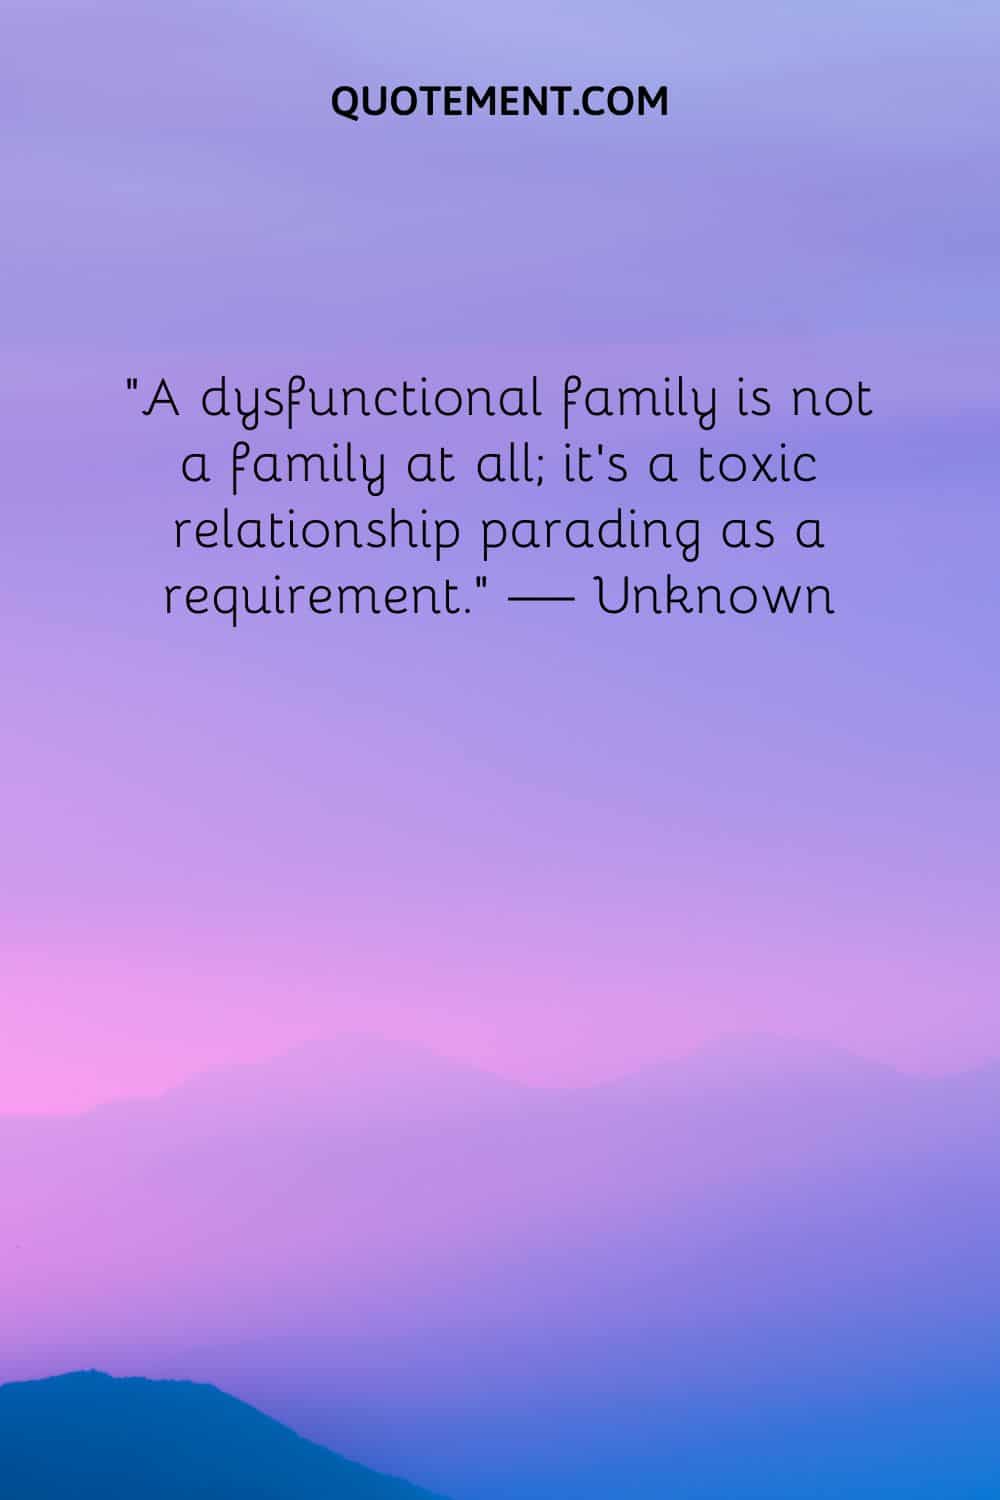 A dysfunctional family is not a family at all; it’s a toxic relationship parading as a requirement